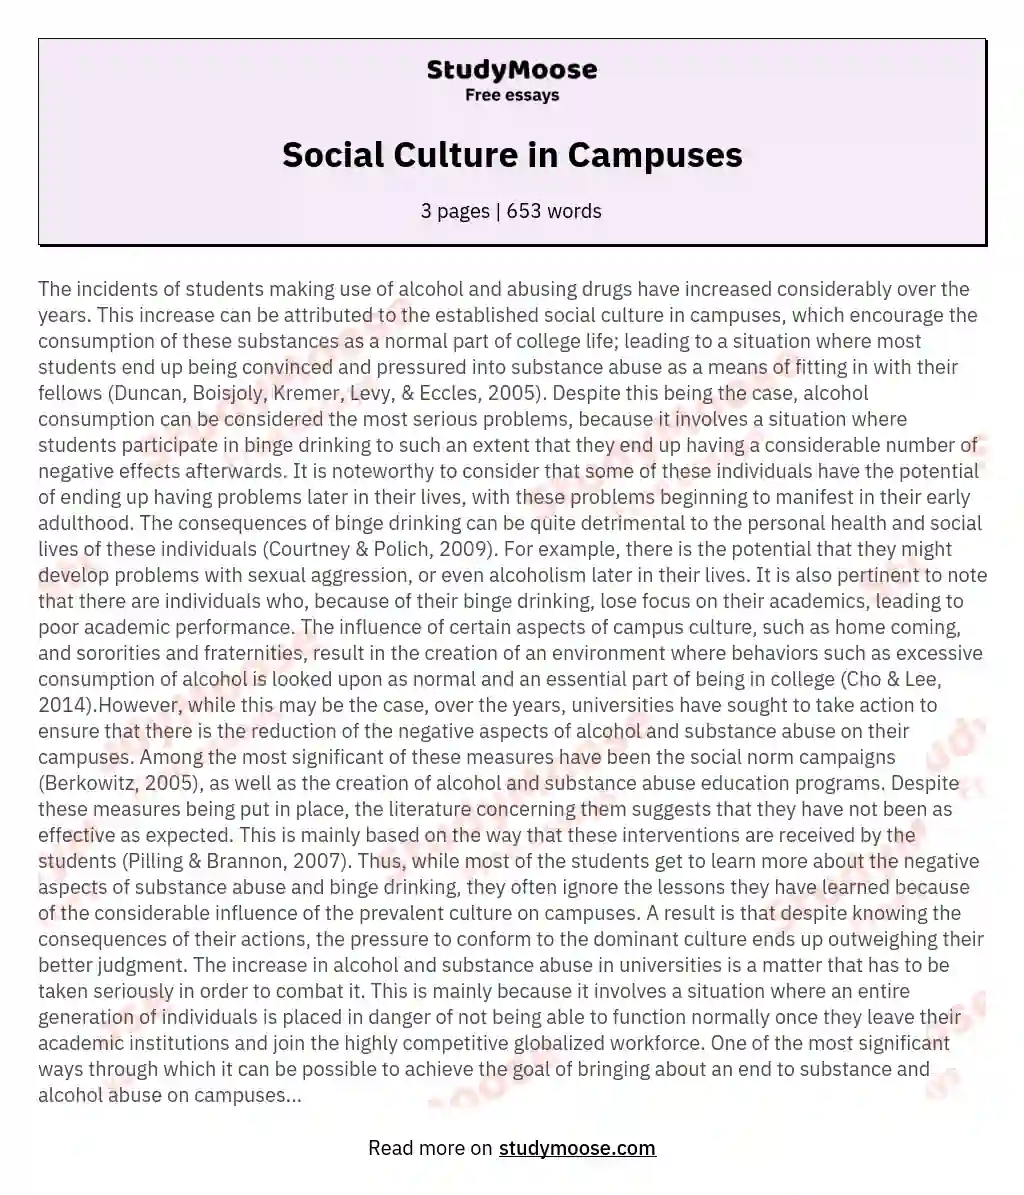 Social Culture in Campuses essay